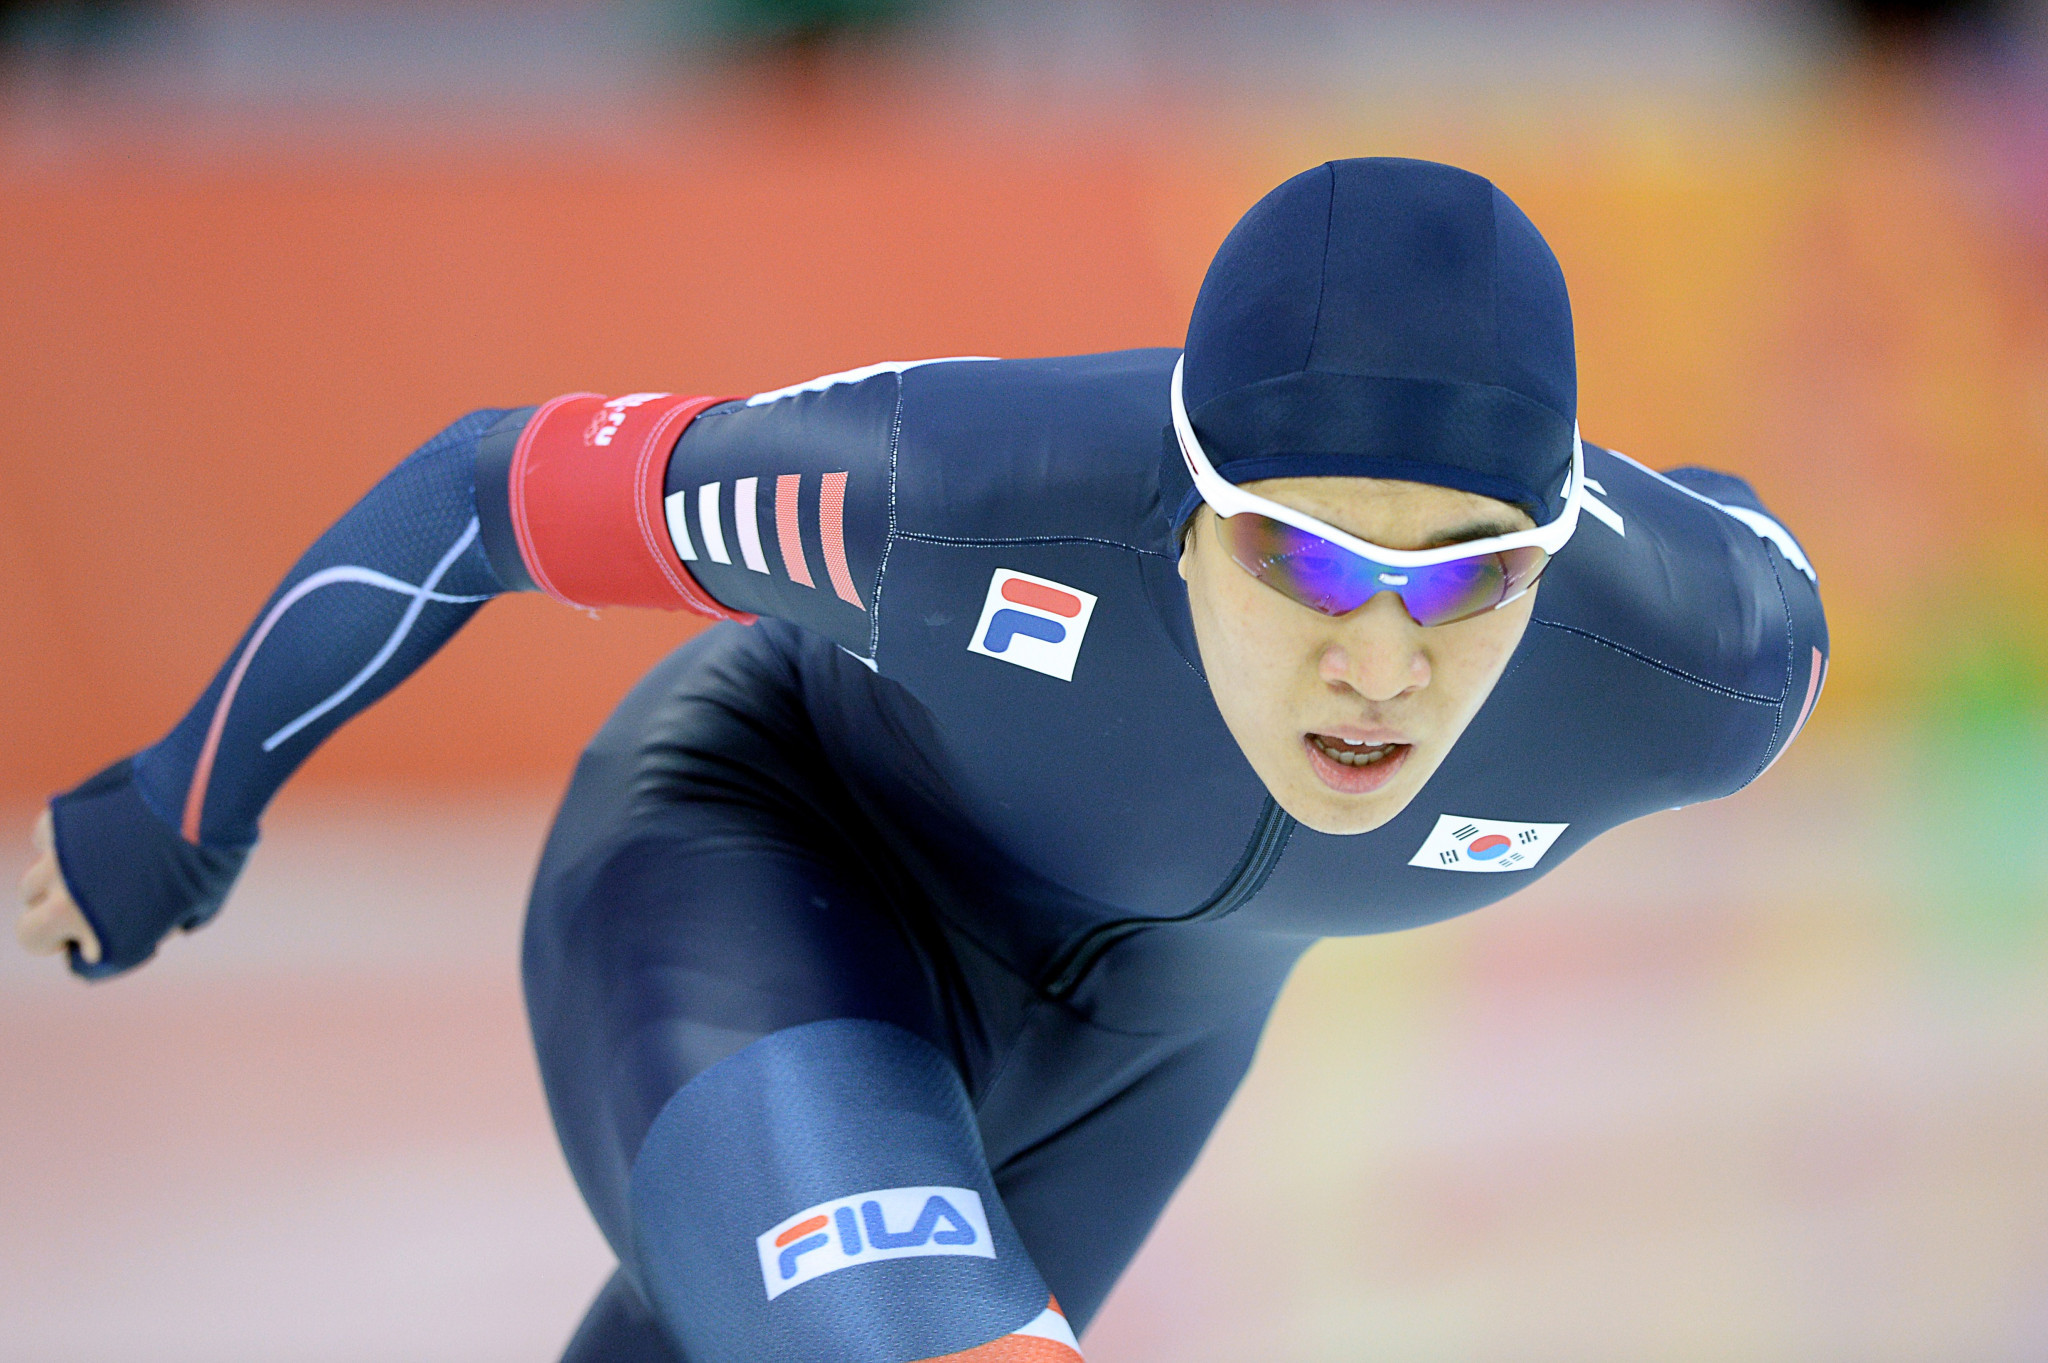 Kim Cheol-min is the other Olympic medallists to be suspended following the drinking incident ©Getty Images